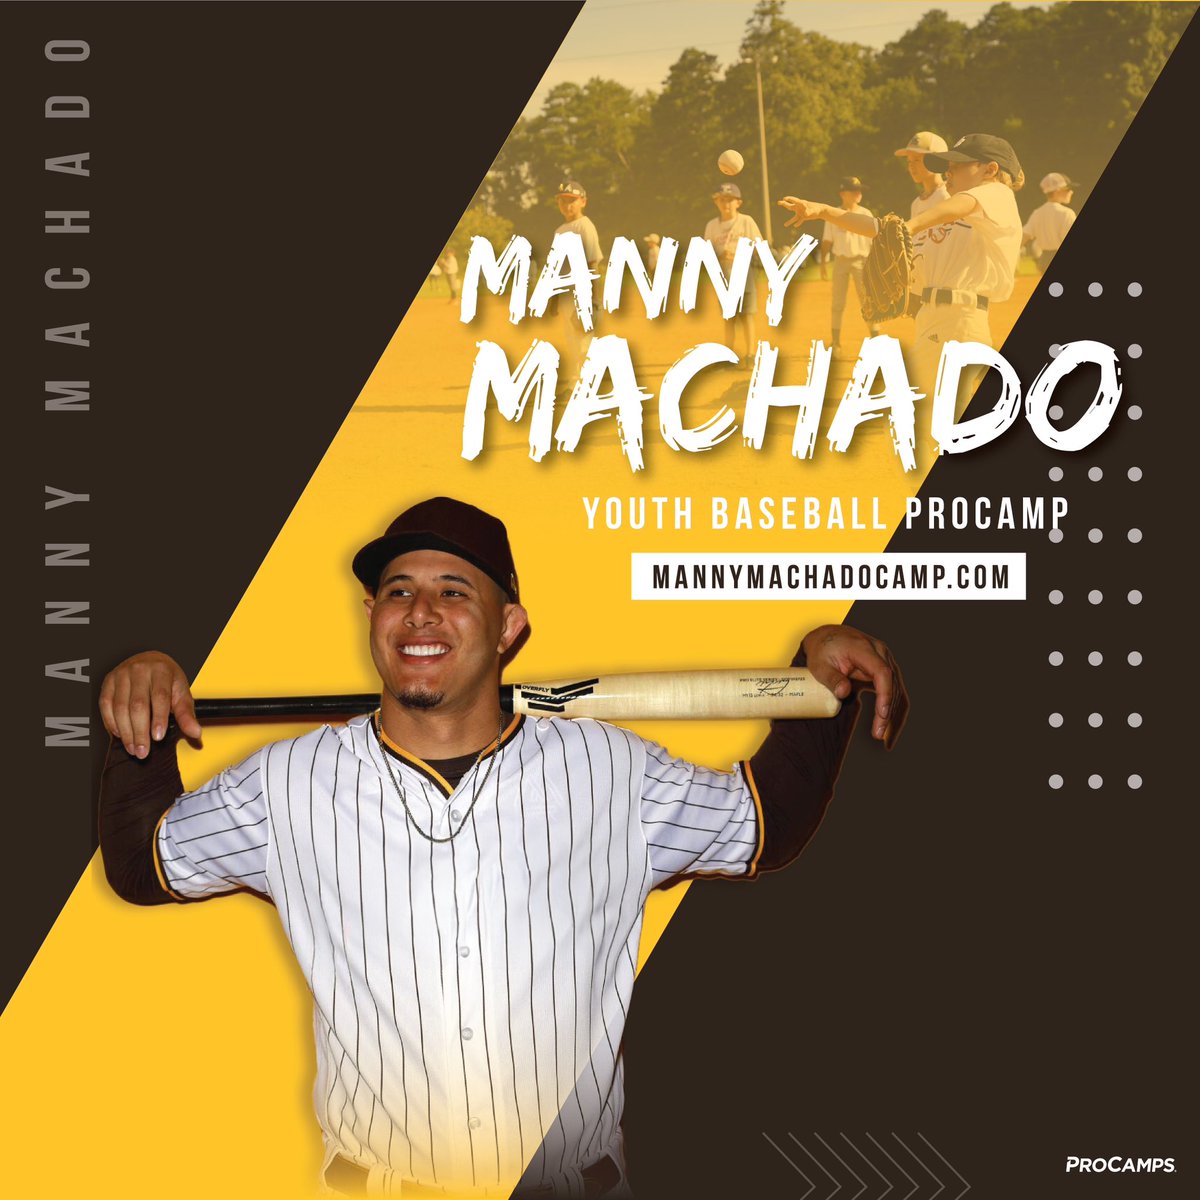 SoCal let’s see you show out! Baseball is BACK and registration for the Manny Machado youth baseball ProCamp is officially OPEN! #FriarFaithful   Visit MannyMachadoCamp.com to sign up! Tag a friend you want to see @ camp in Cali 👀🌴⚾